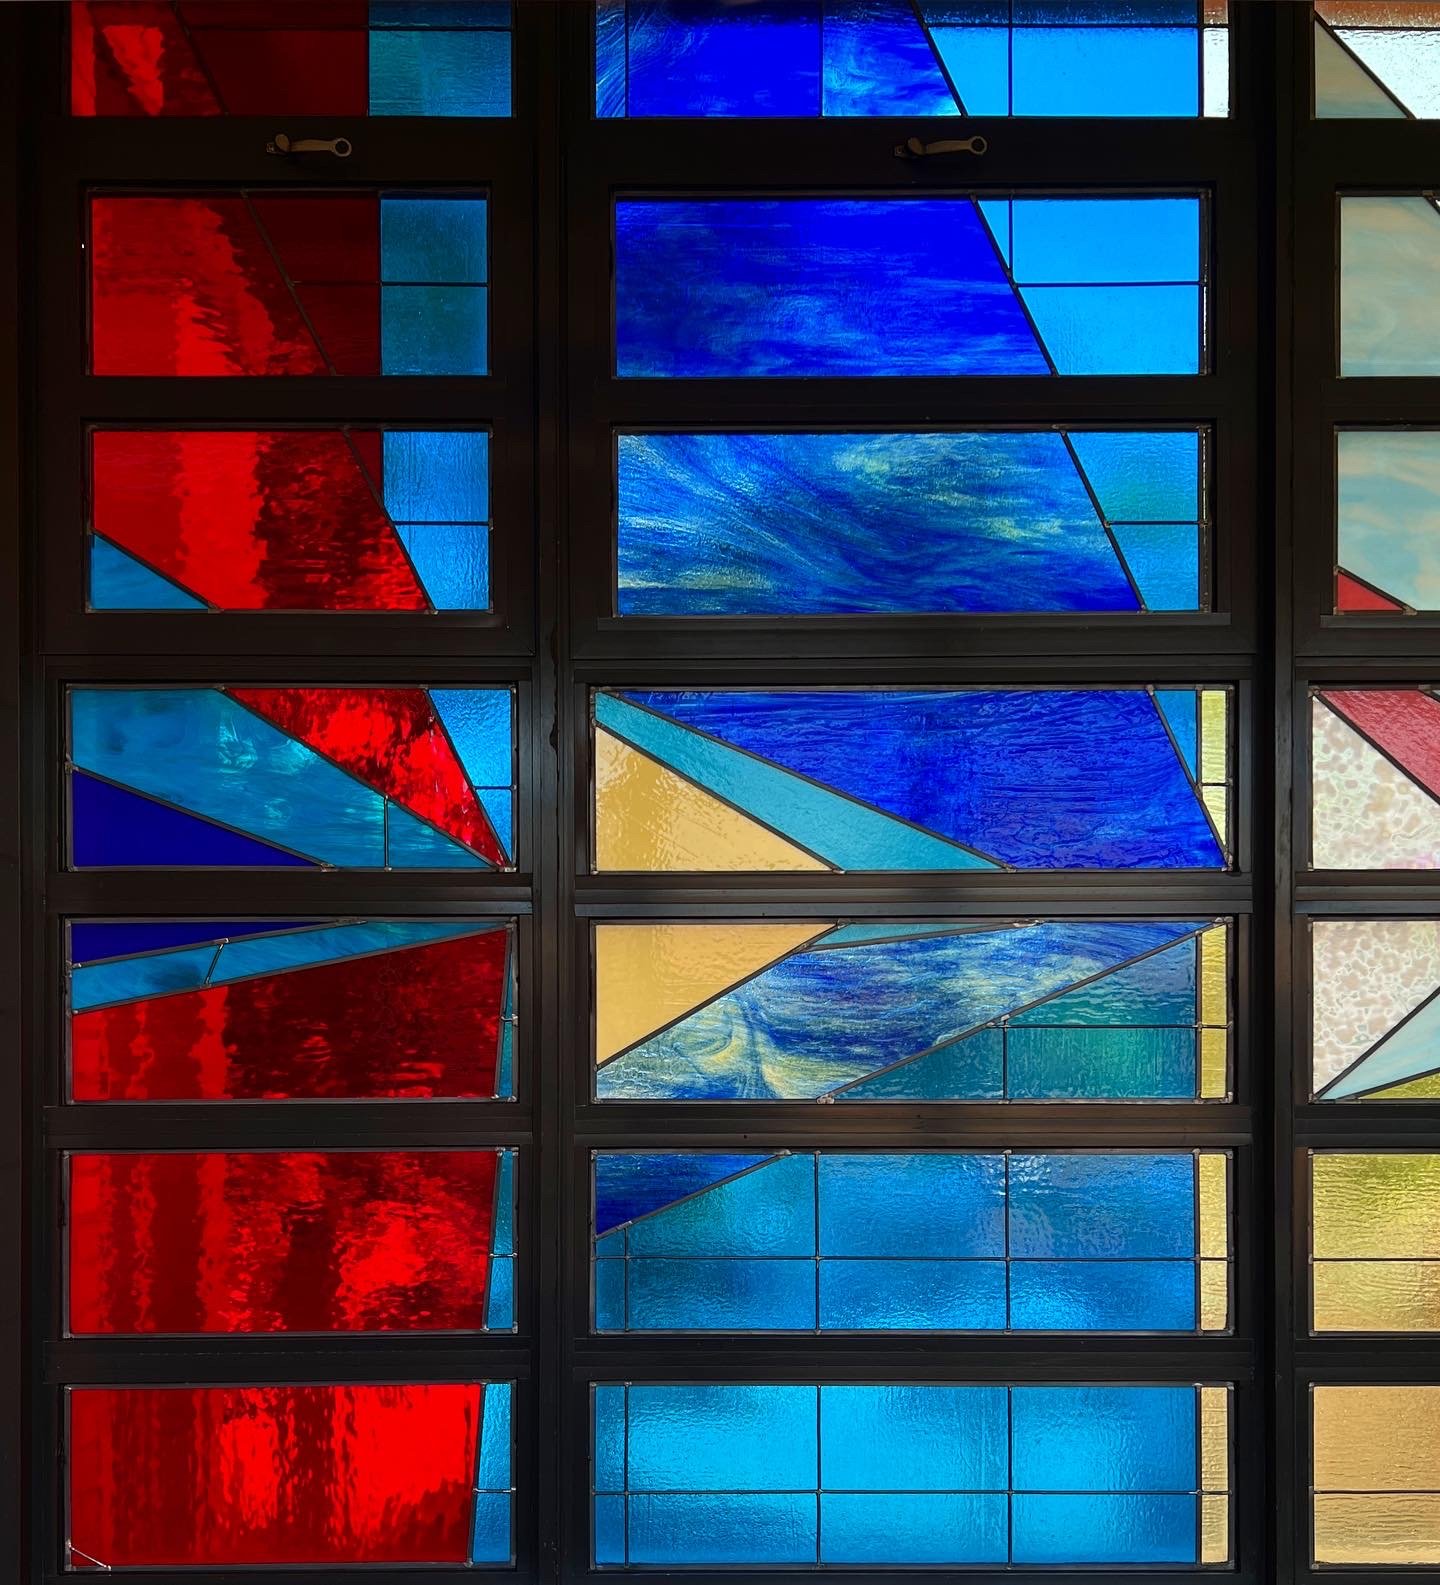 A side-view of a multi-colored, multi-paneled, stained glass window taken from the hallway of a school. Also, included are two close-ups of sections of the stained glass installation.